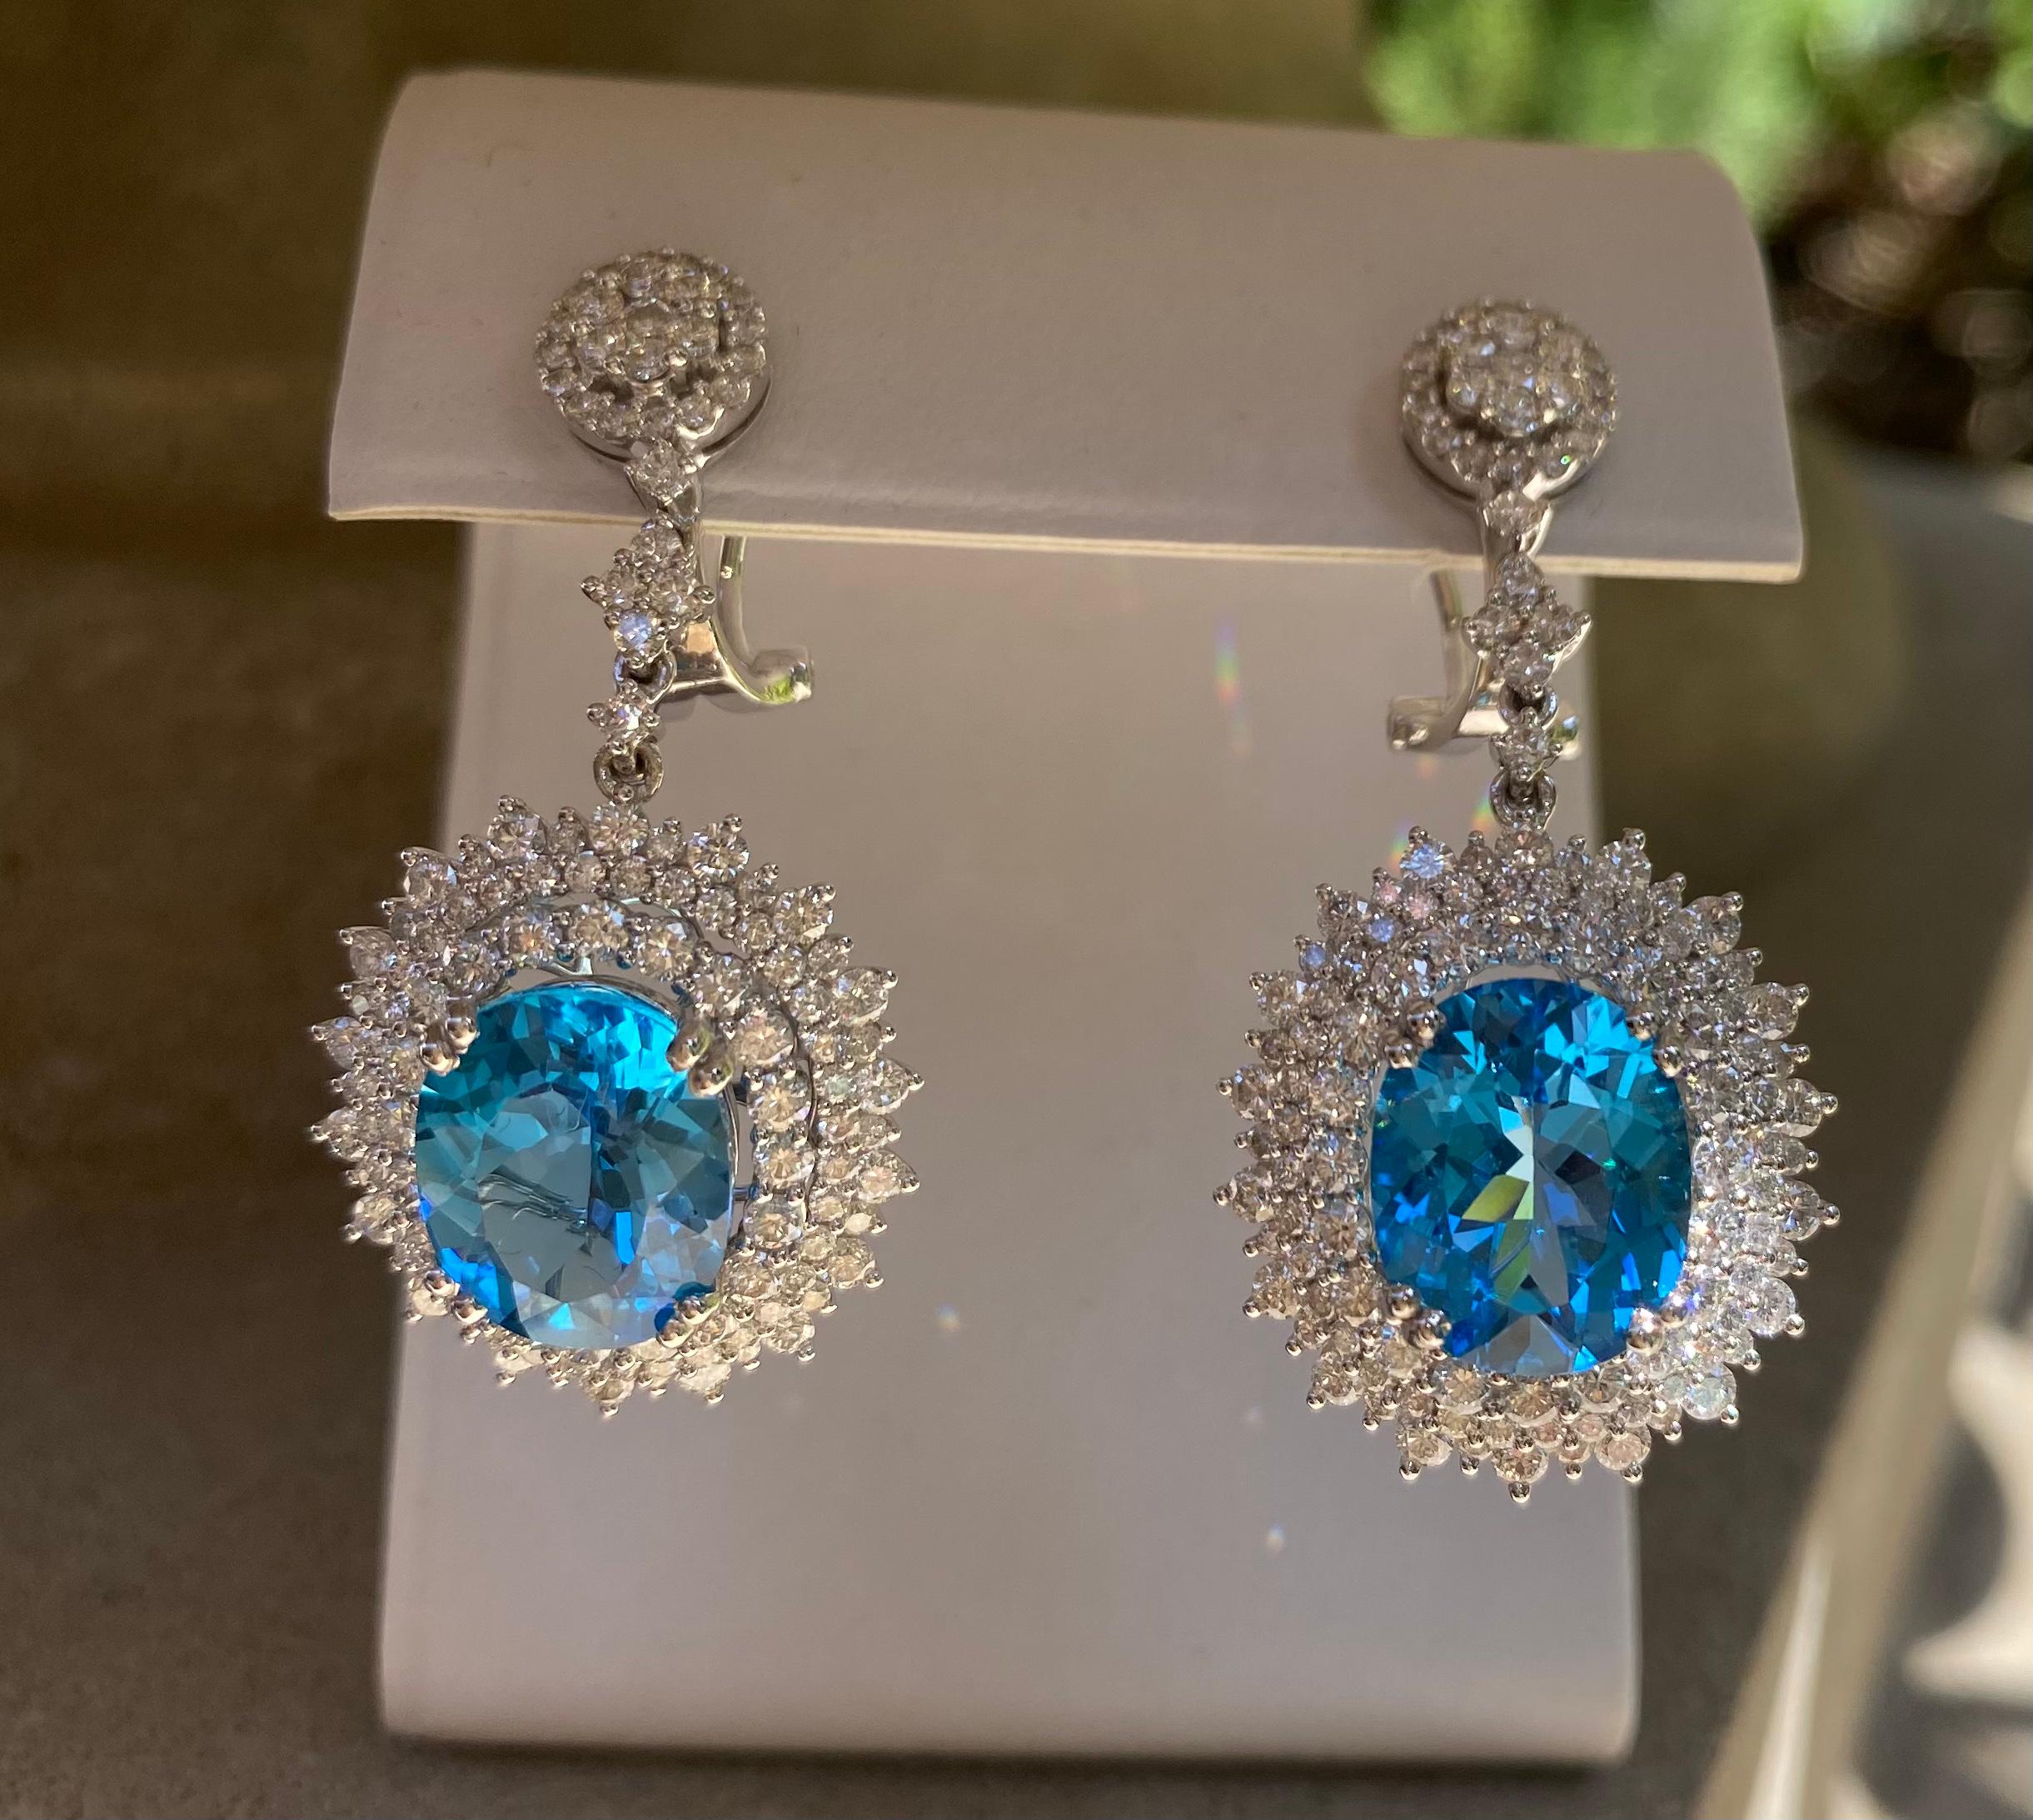 Contemporary Scintillating Pair of 16.34 Carat Vivid Blue Topaz and Diamond 18K Gold Earrings For Sale